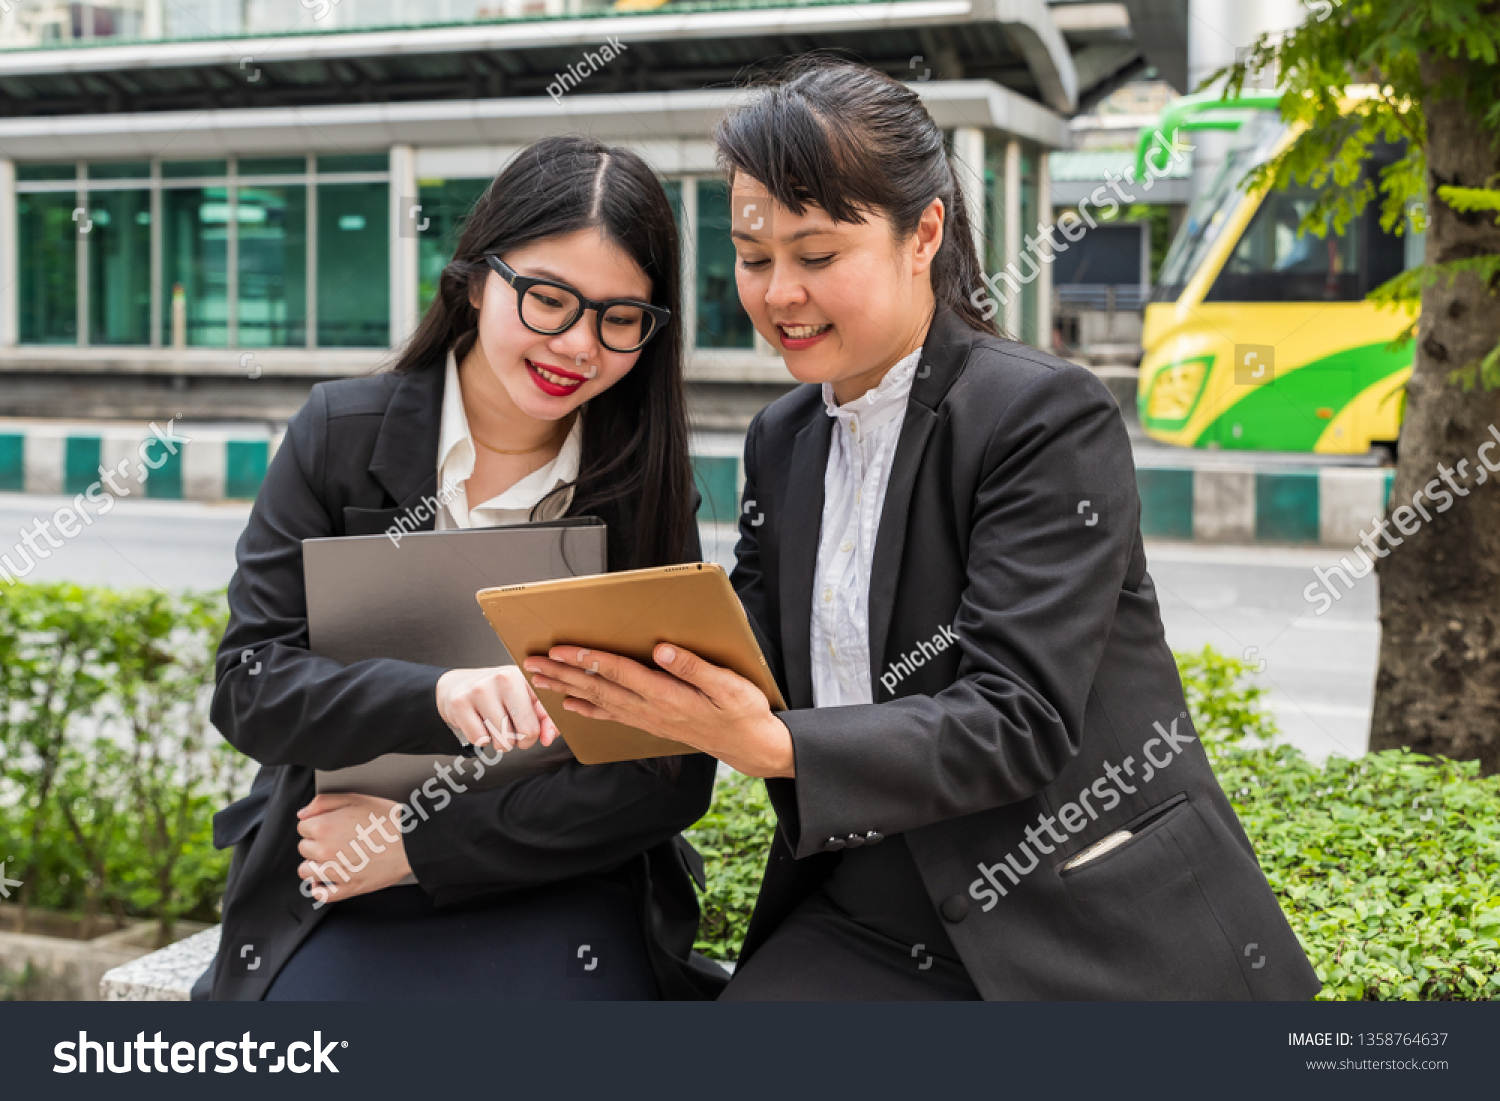 Two businesswomen looking at tablet while holding paper file holder with cityscape as background #1358764637